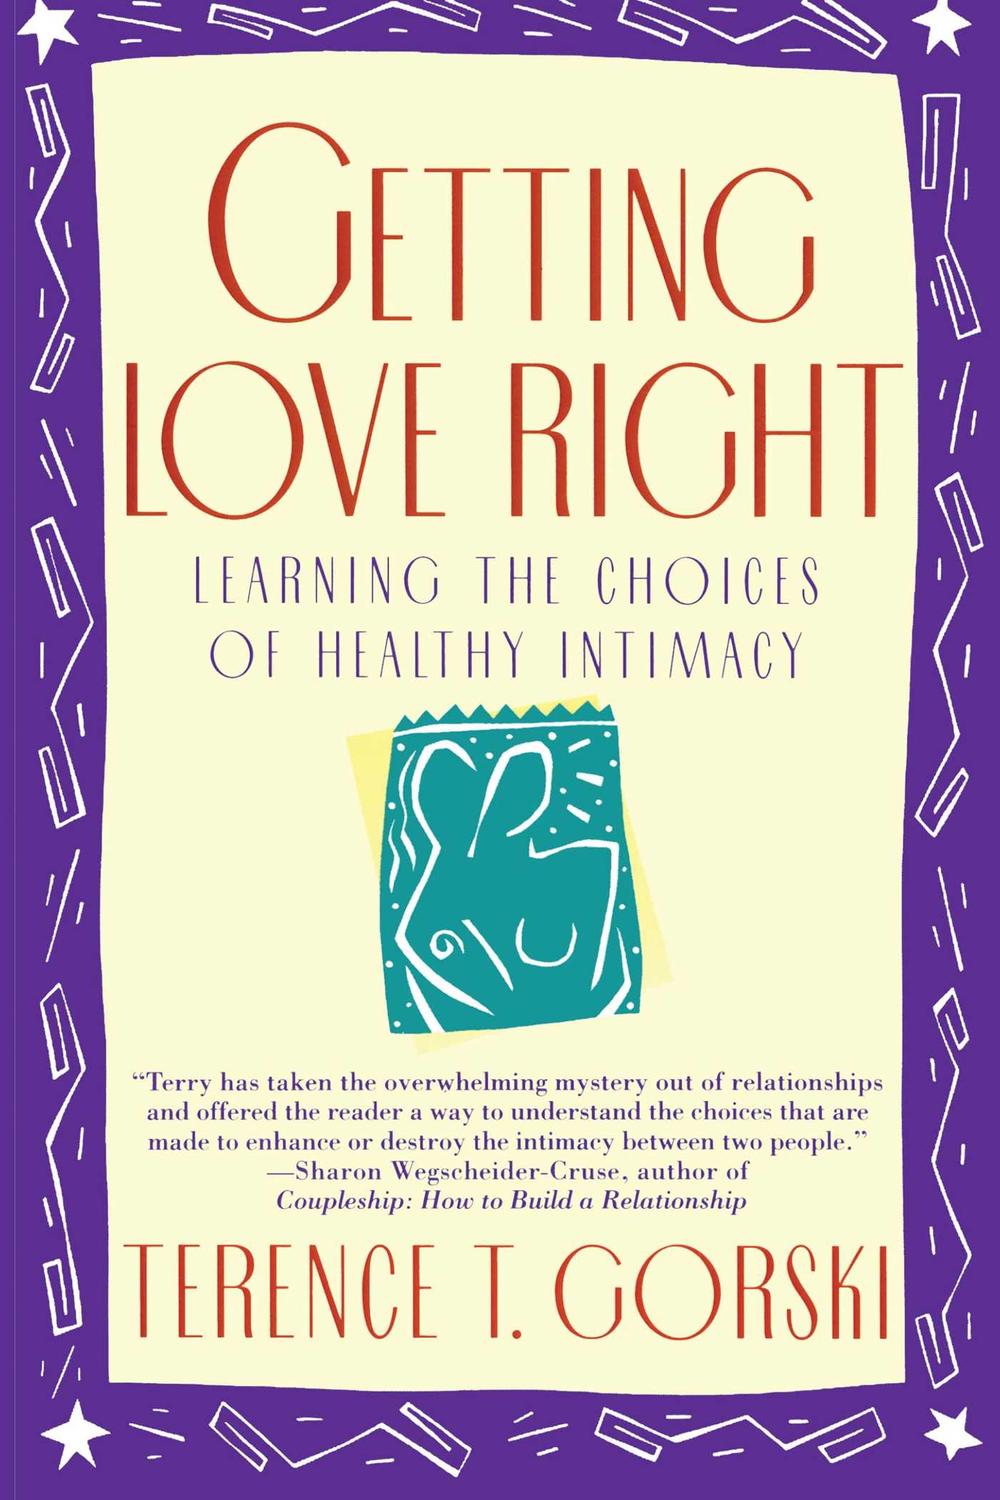 Getting Love Right - Terence T. Gorski